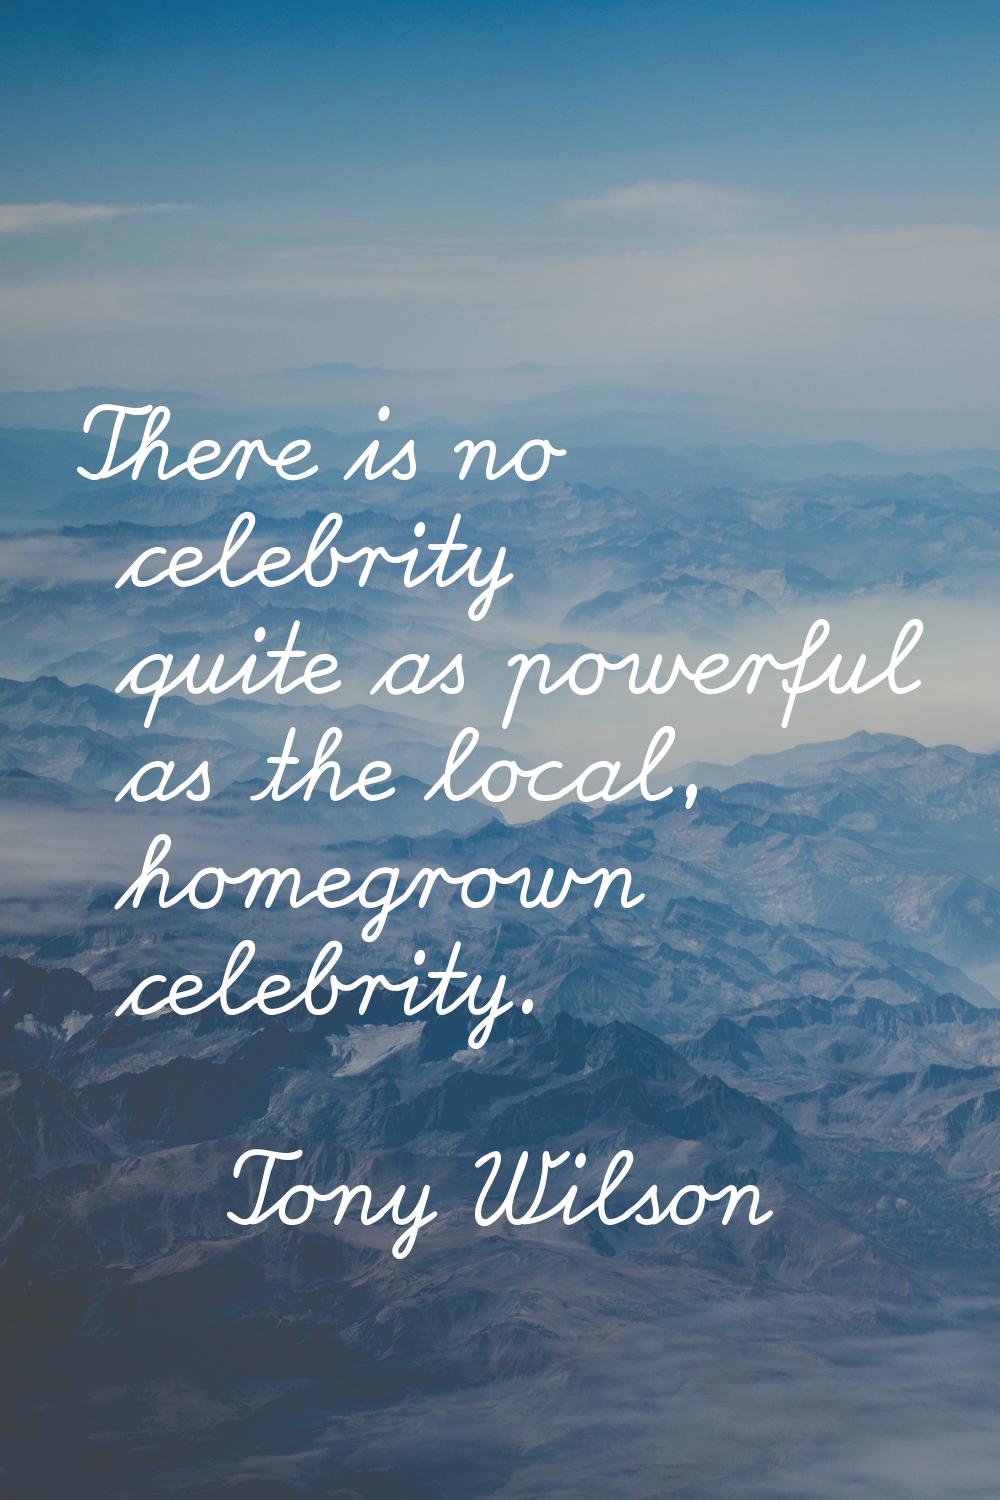 There is no celebrity quite as powerful as the local, homegrown celebrity.